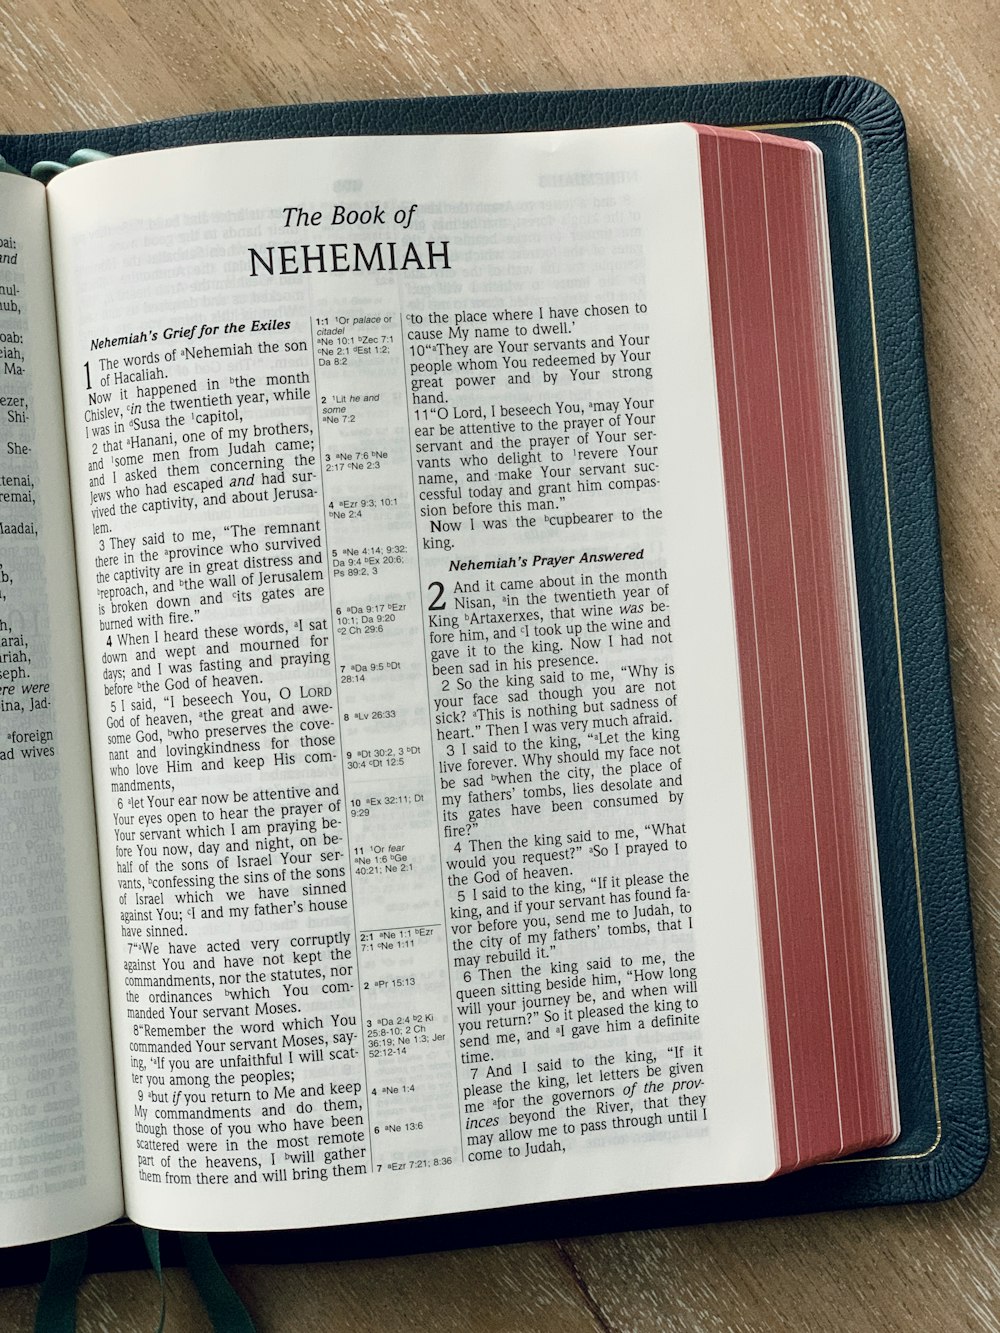 a book of nehemiah on a wooden table